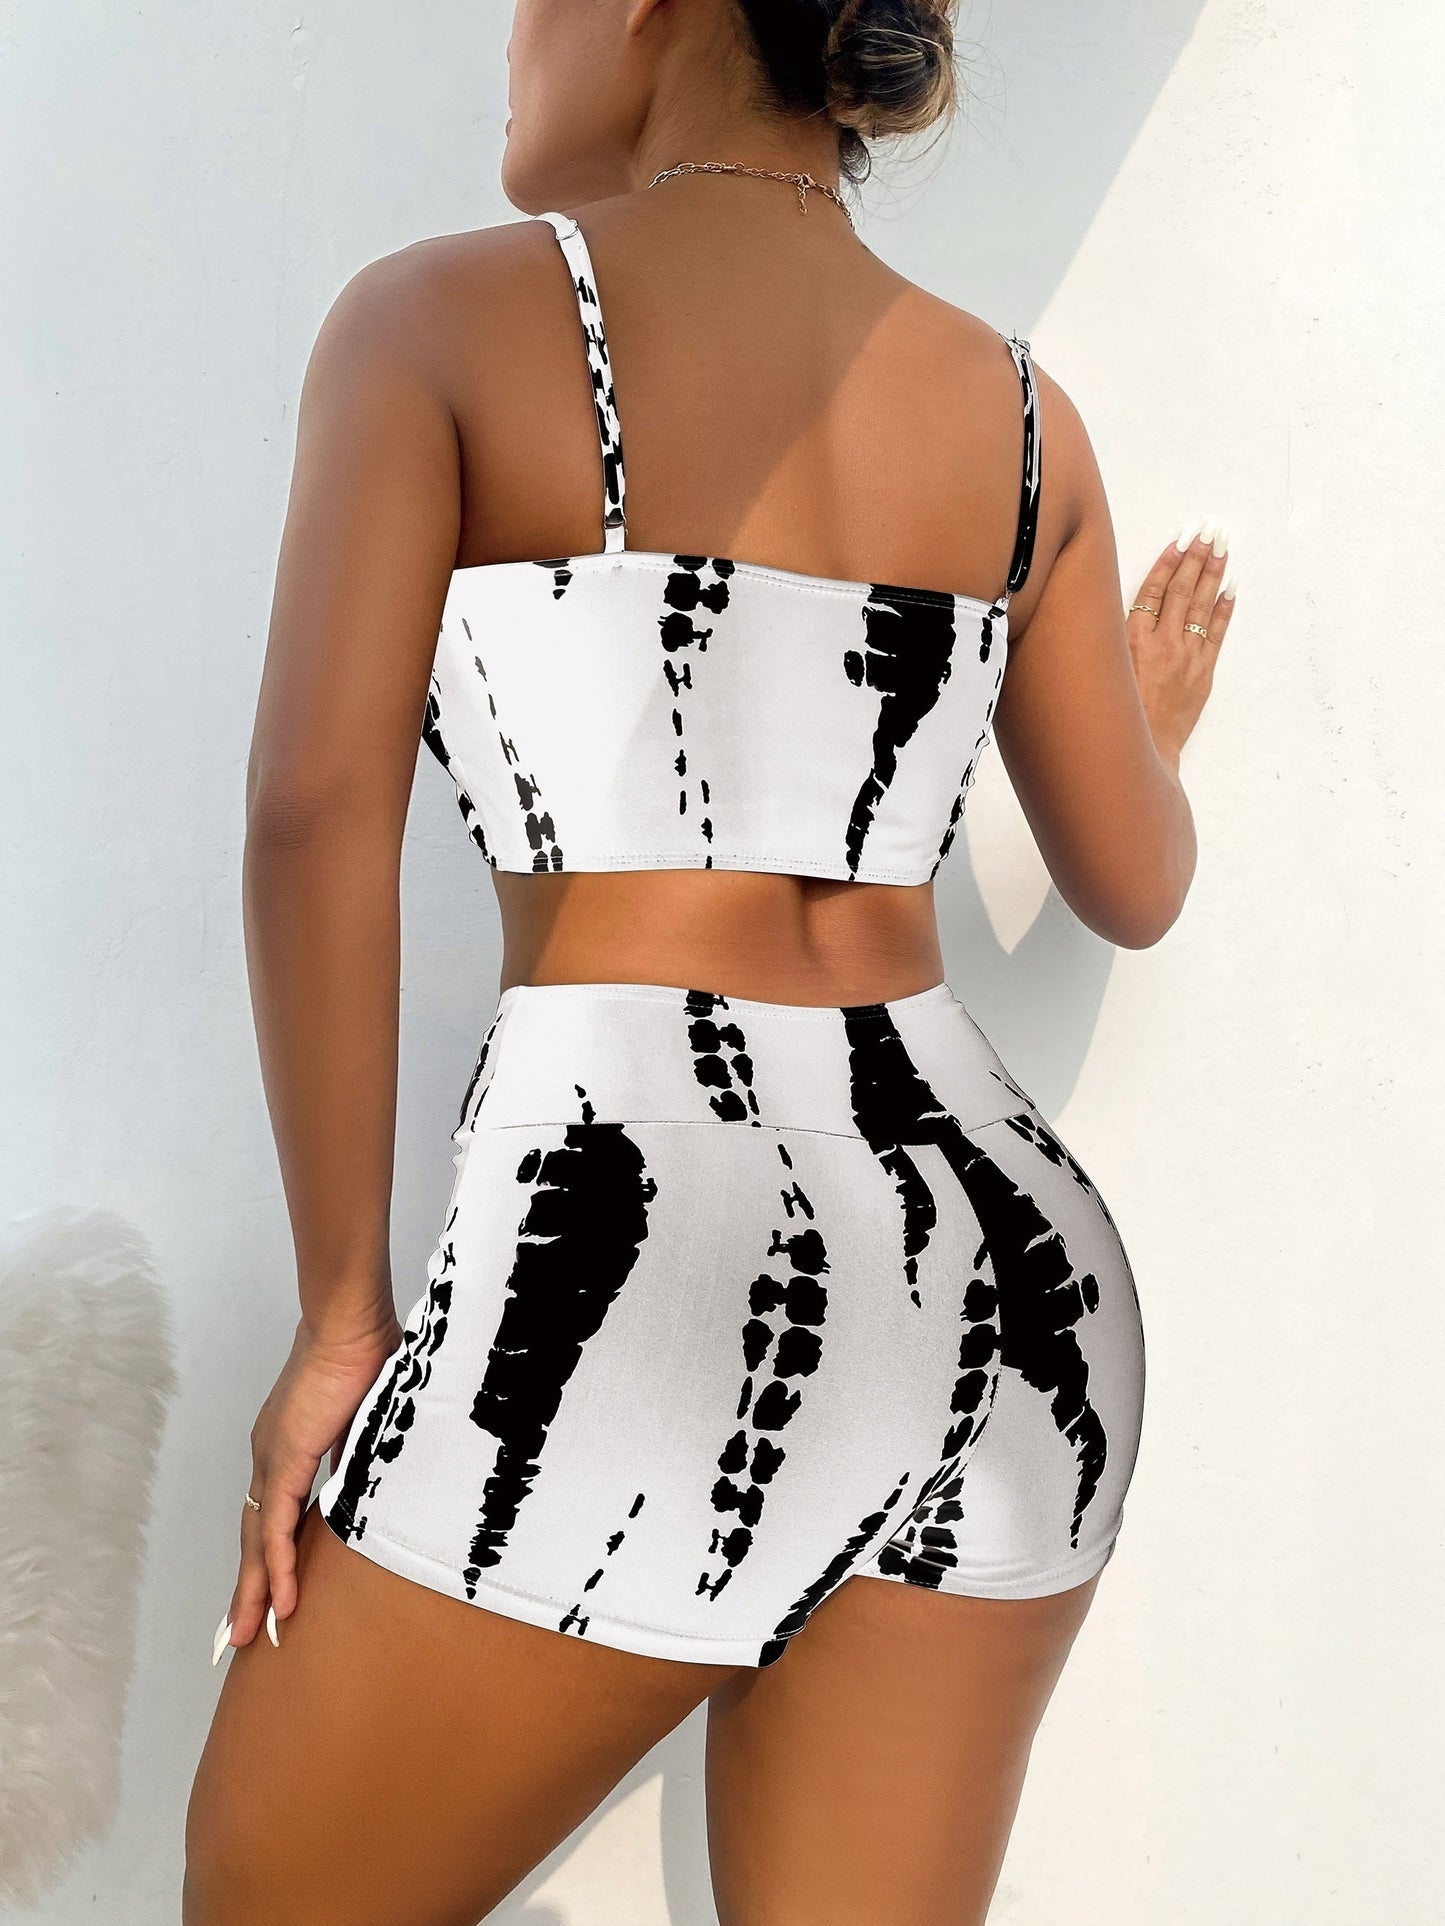 Bow Tie Front Two Piece Swimsuit Spaghetti Straps High Waisted Bikini With Swim Shorts For Women